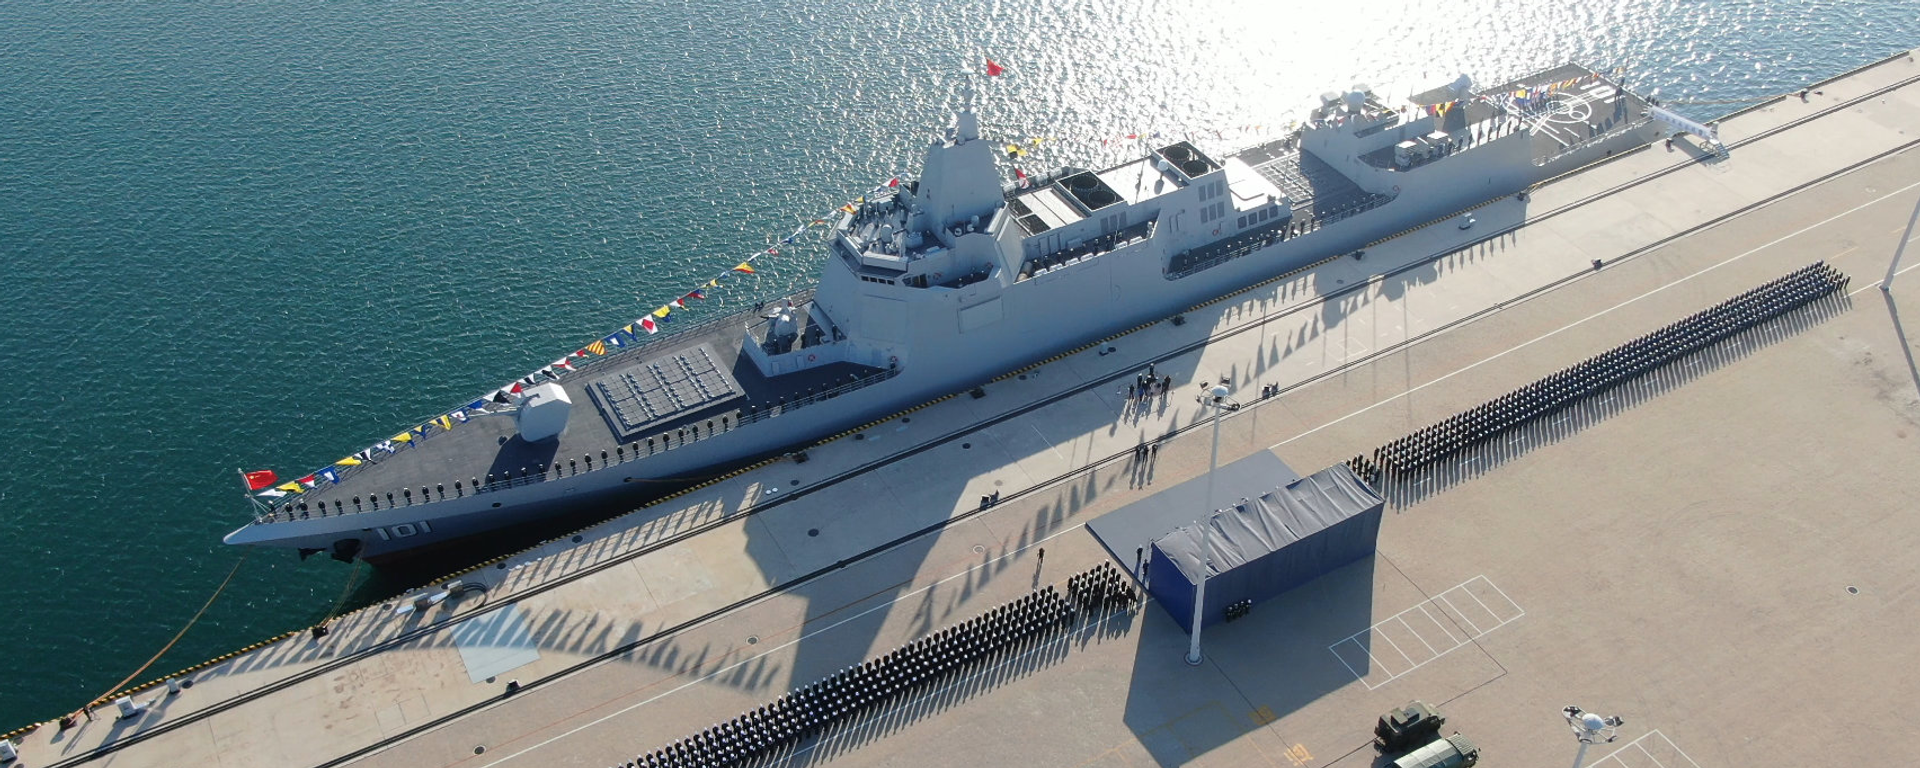 The People's Liberation Army Navy commissioned its first Type 055 warship, Nanchang, on Sunday in Qingdao - Sputnik International, 1920, 13.01.2020